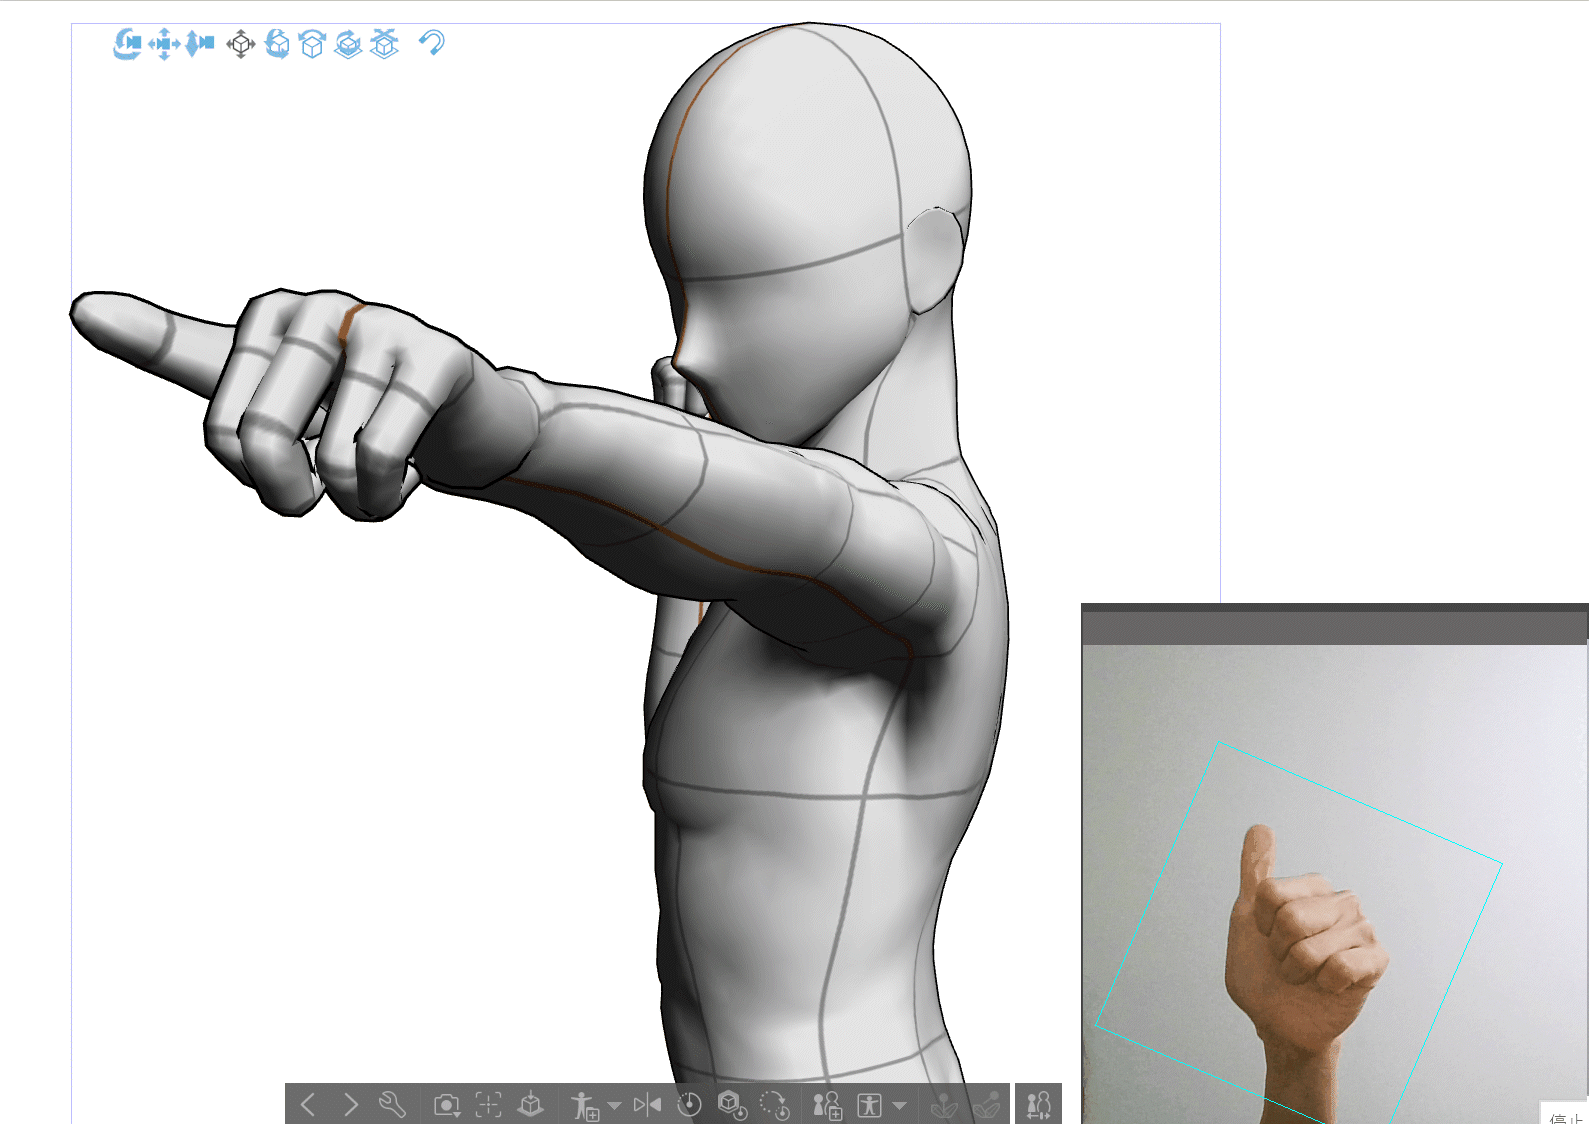 Model: Male Hand Poses (30) - FfxivOdette's Ko-fi Shop - Ko-fi ❤️ Where  creators get support from fans through donations, memberships, shop sales  and more! The original 'Buy Me a Coffee' Page.